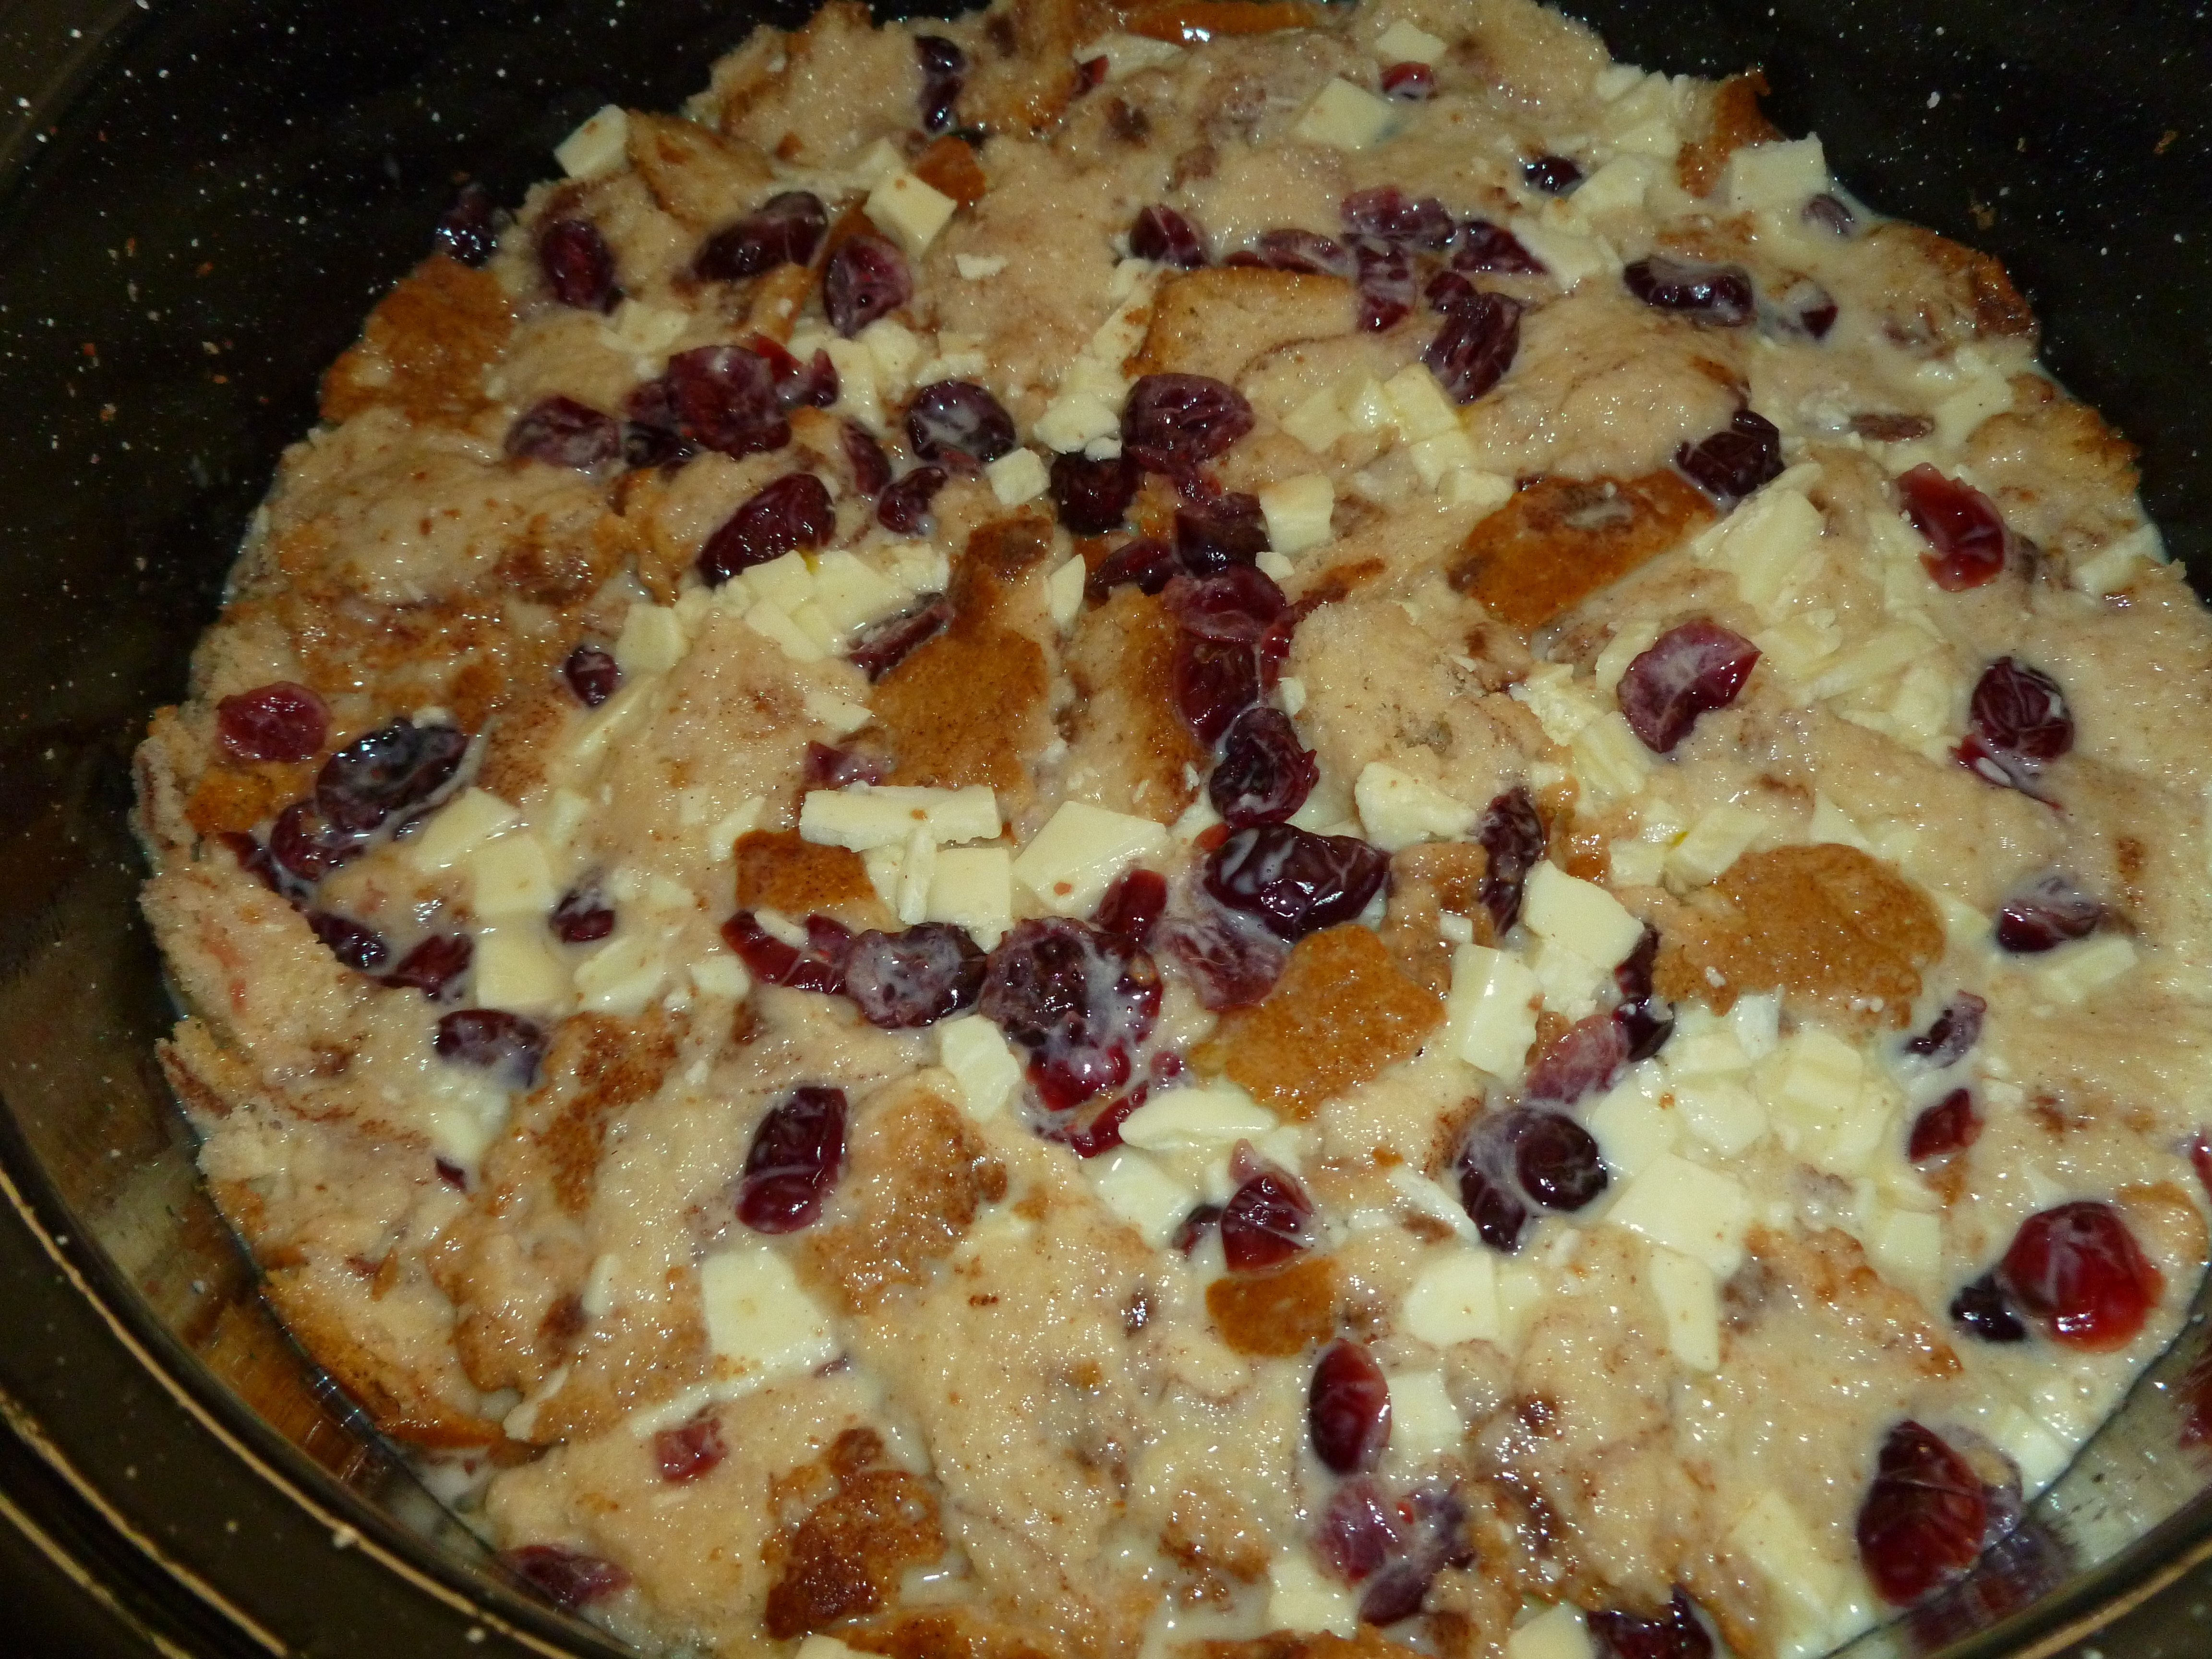 Solar baked White Chocolate Bread Pudding